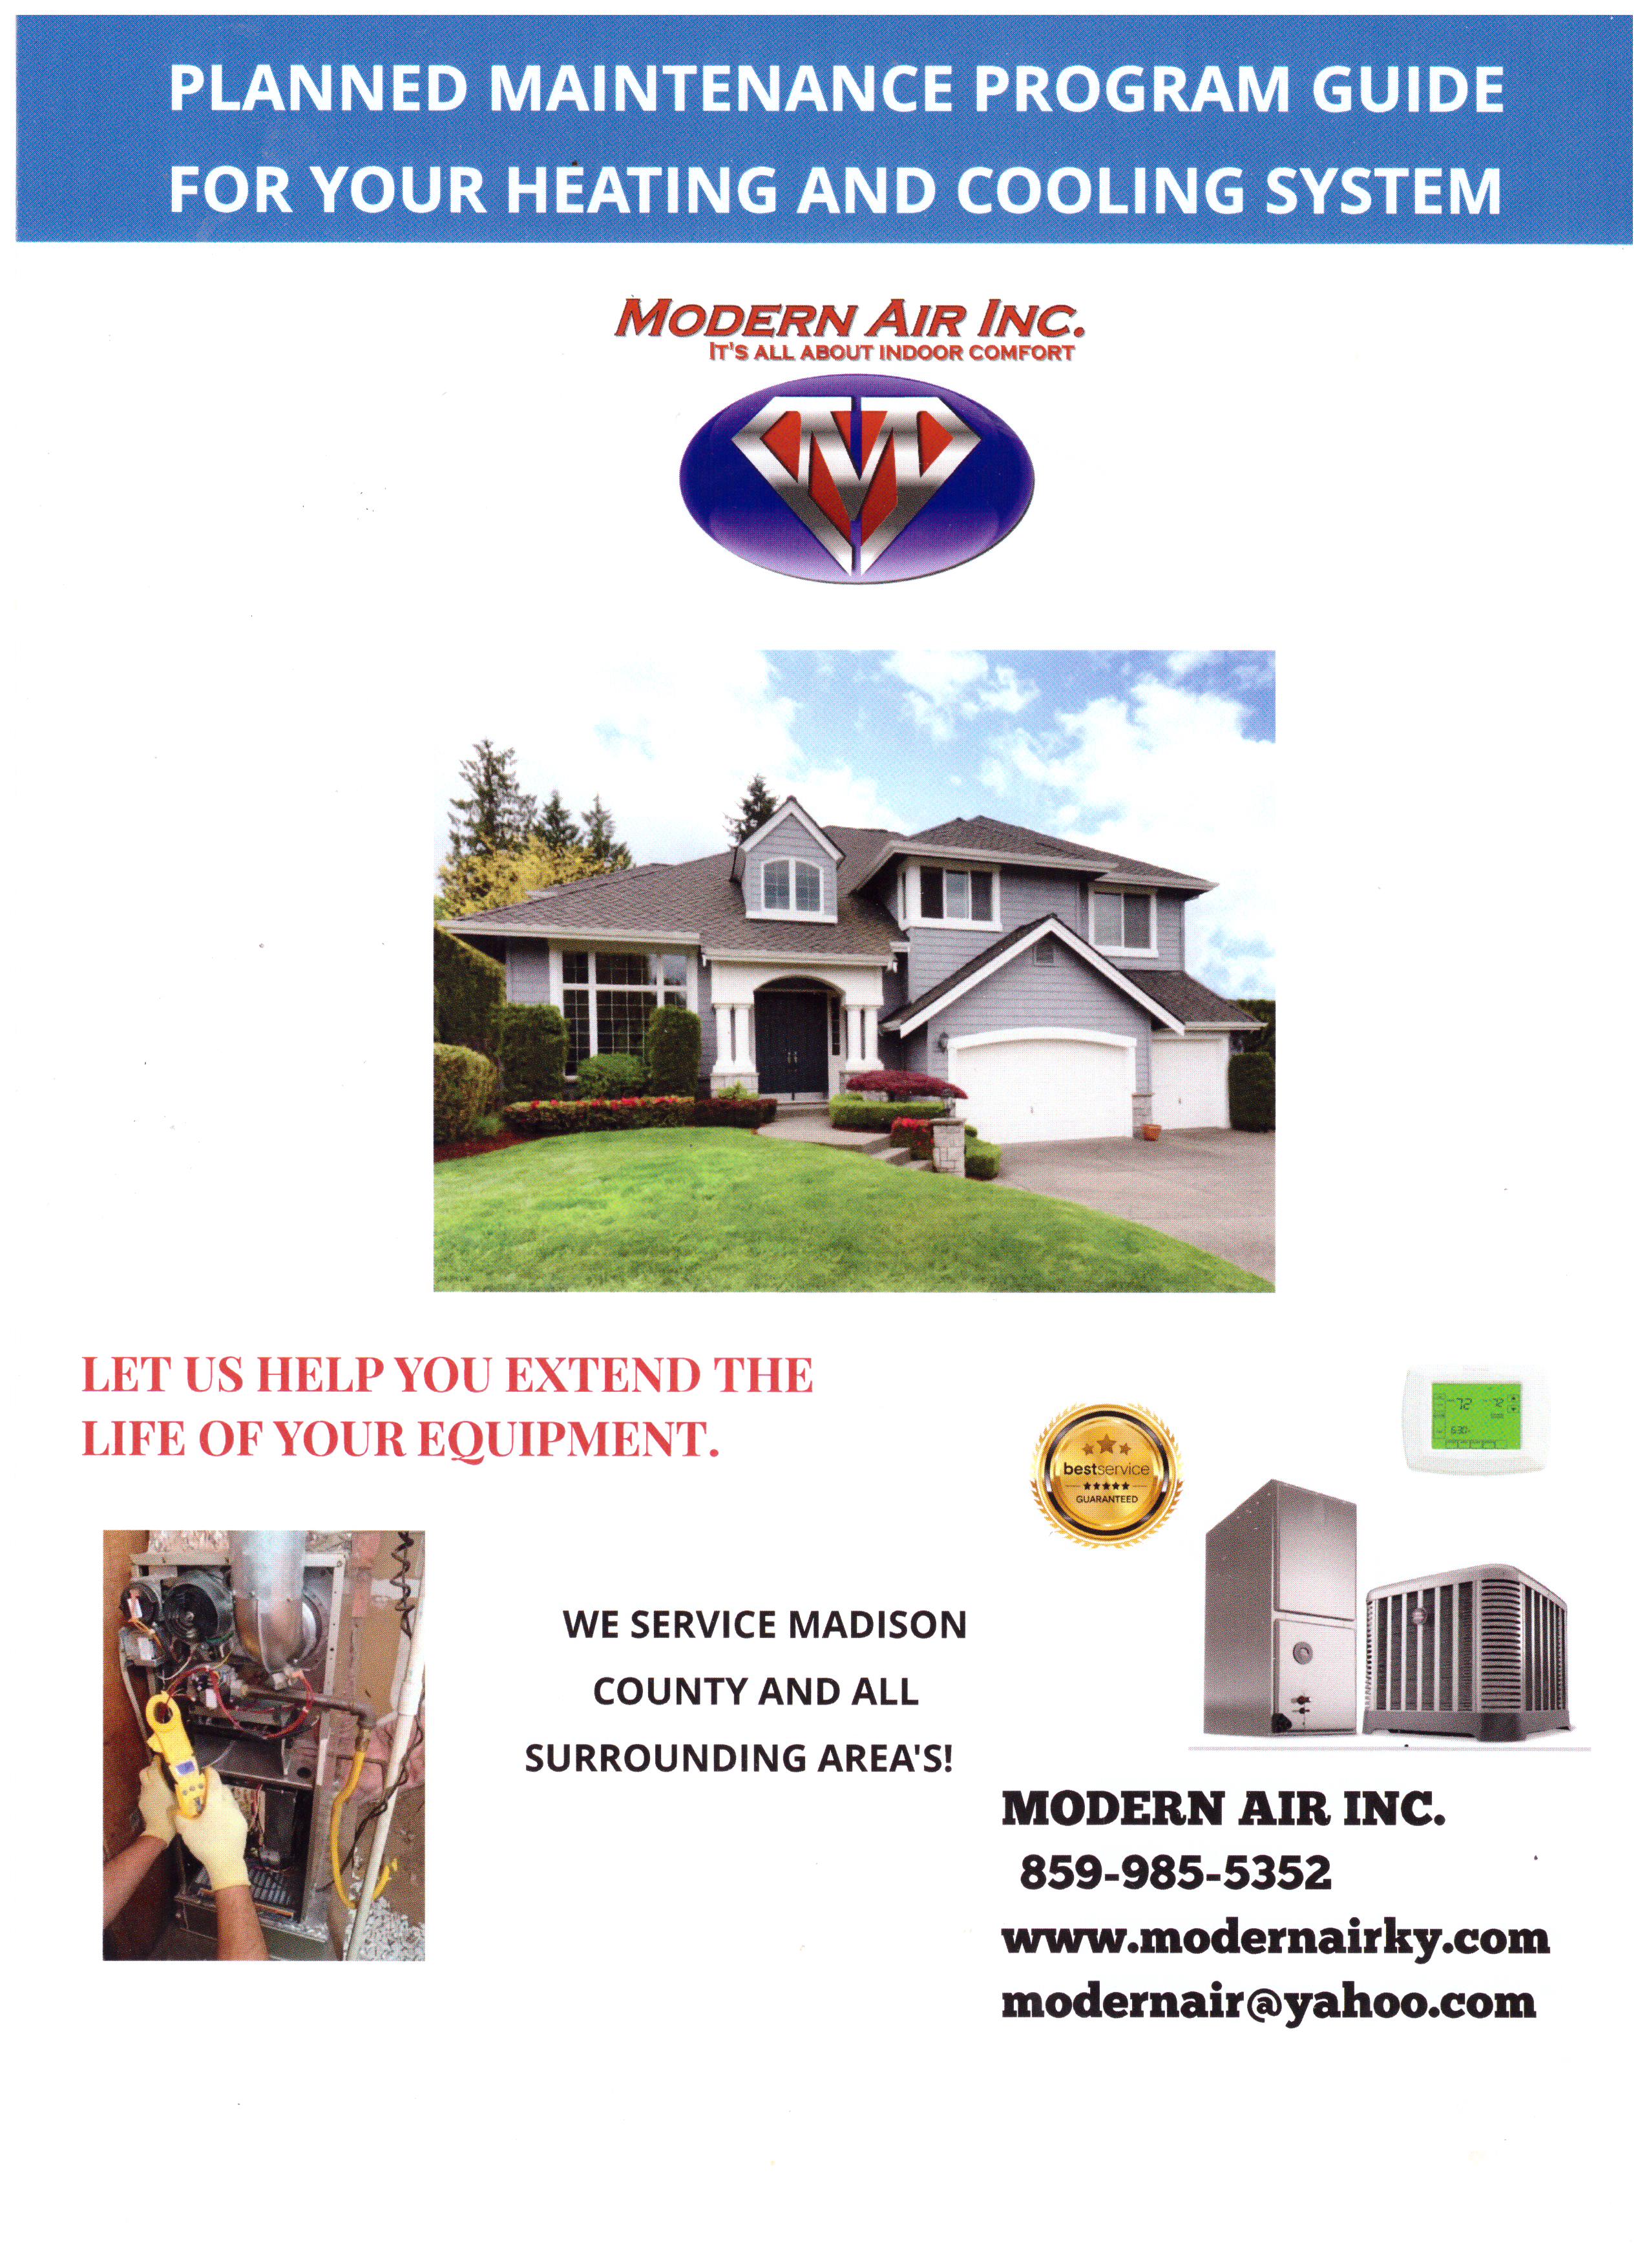 Sign up for Modern Air's Maintenance Program today